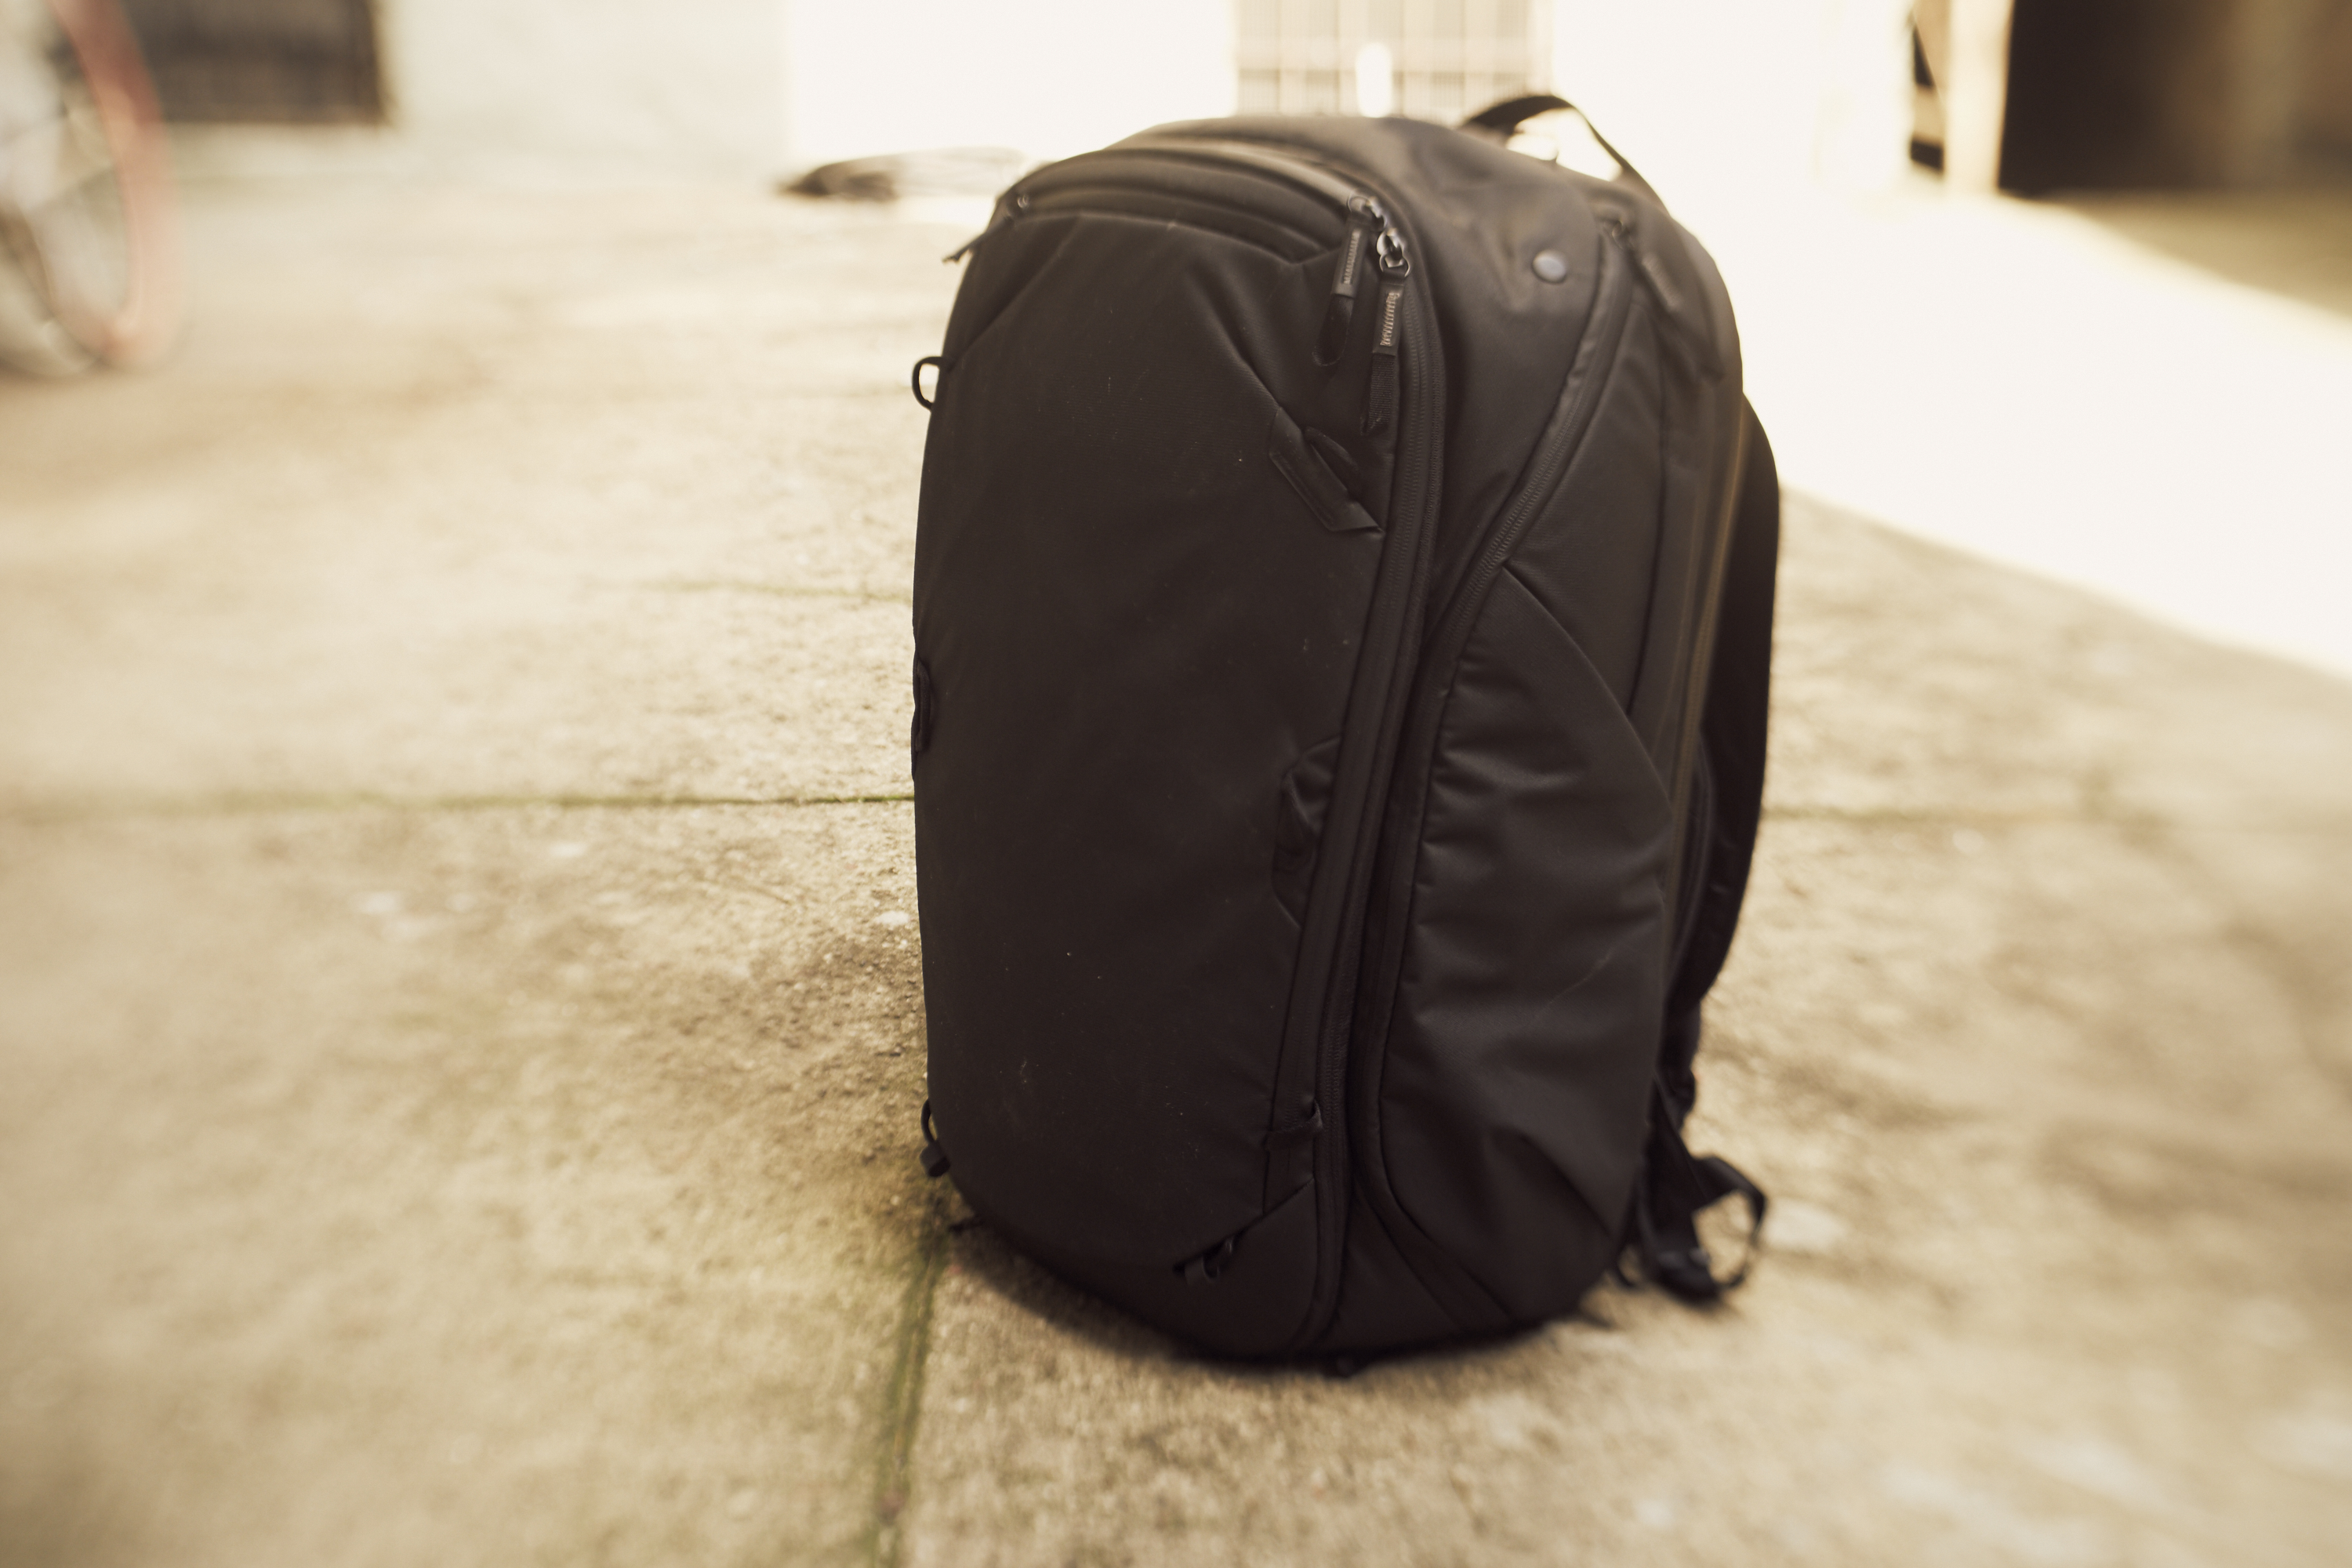 Peak Design 45L Travel Backpack review: One bag for photography